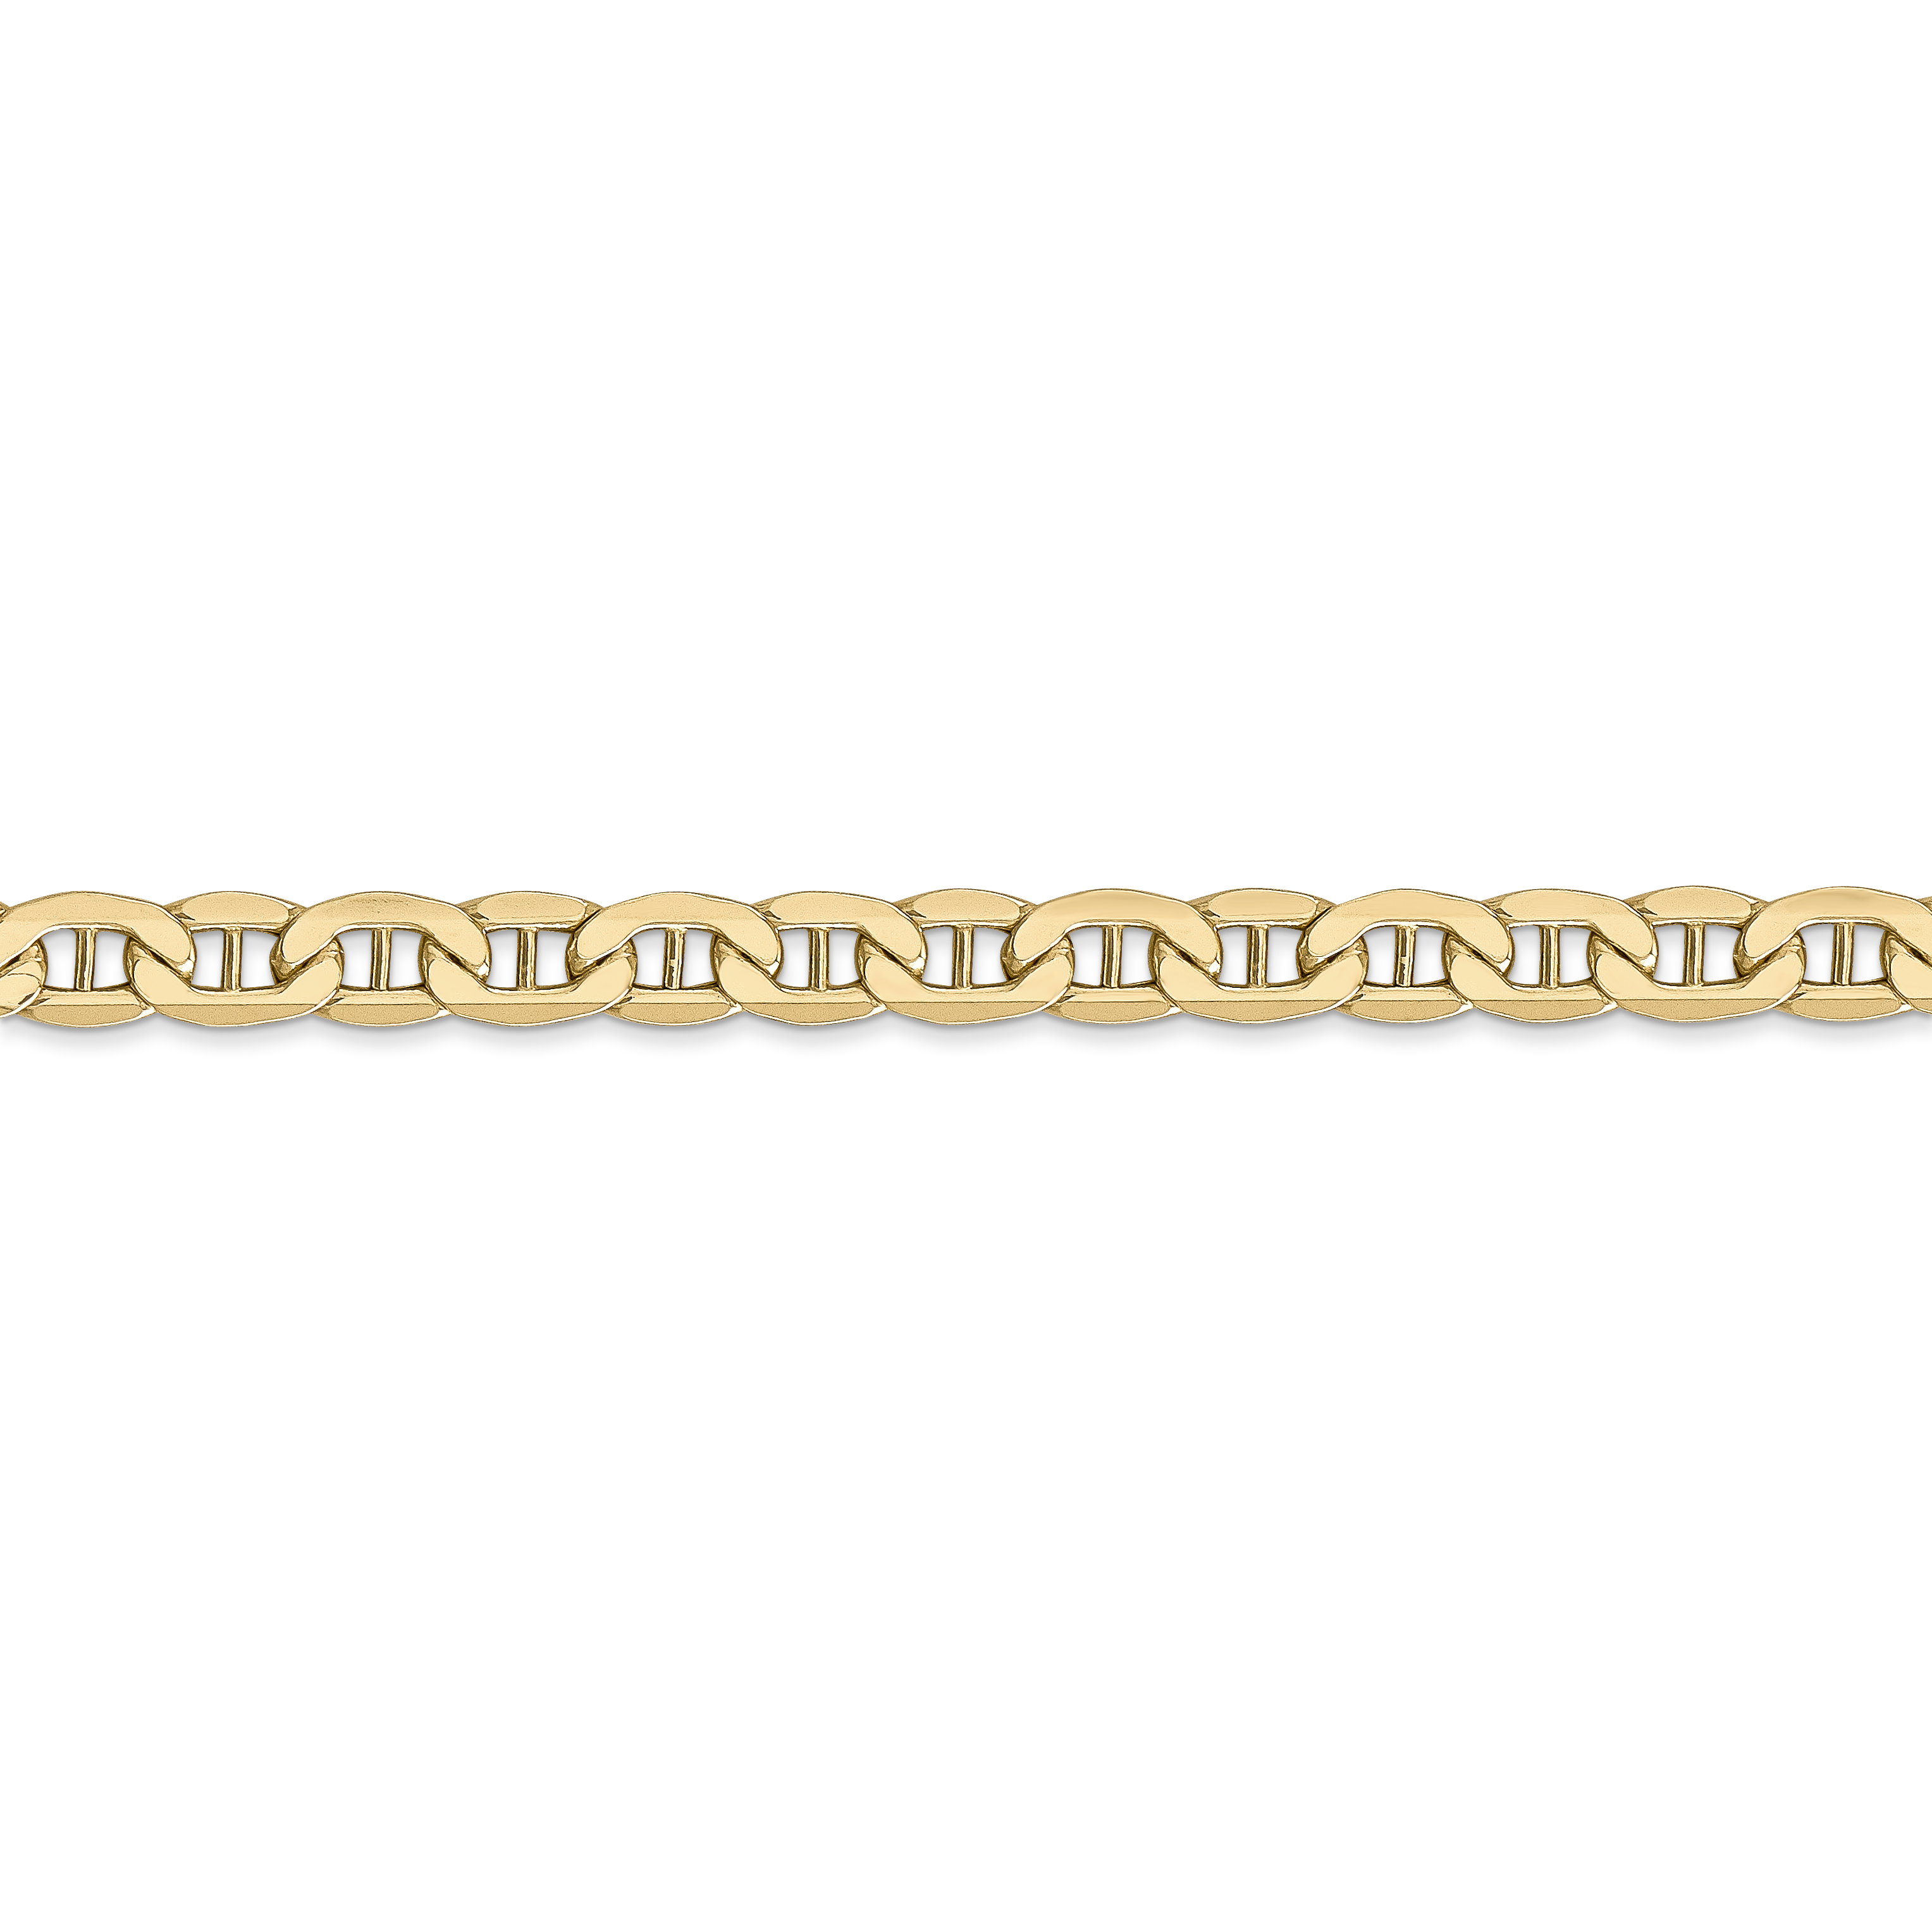 Primal Gold 14 Karat Yellow Gold 4.75mm Semi-Solid Anchor Chain - image 4 of 7